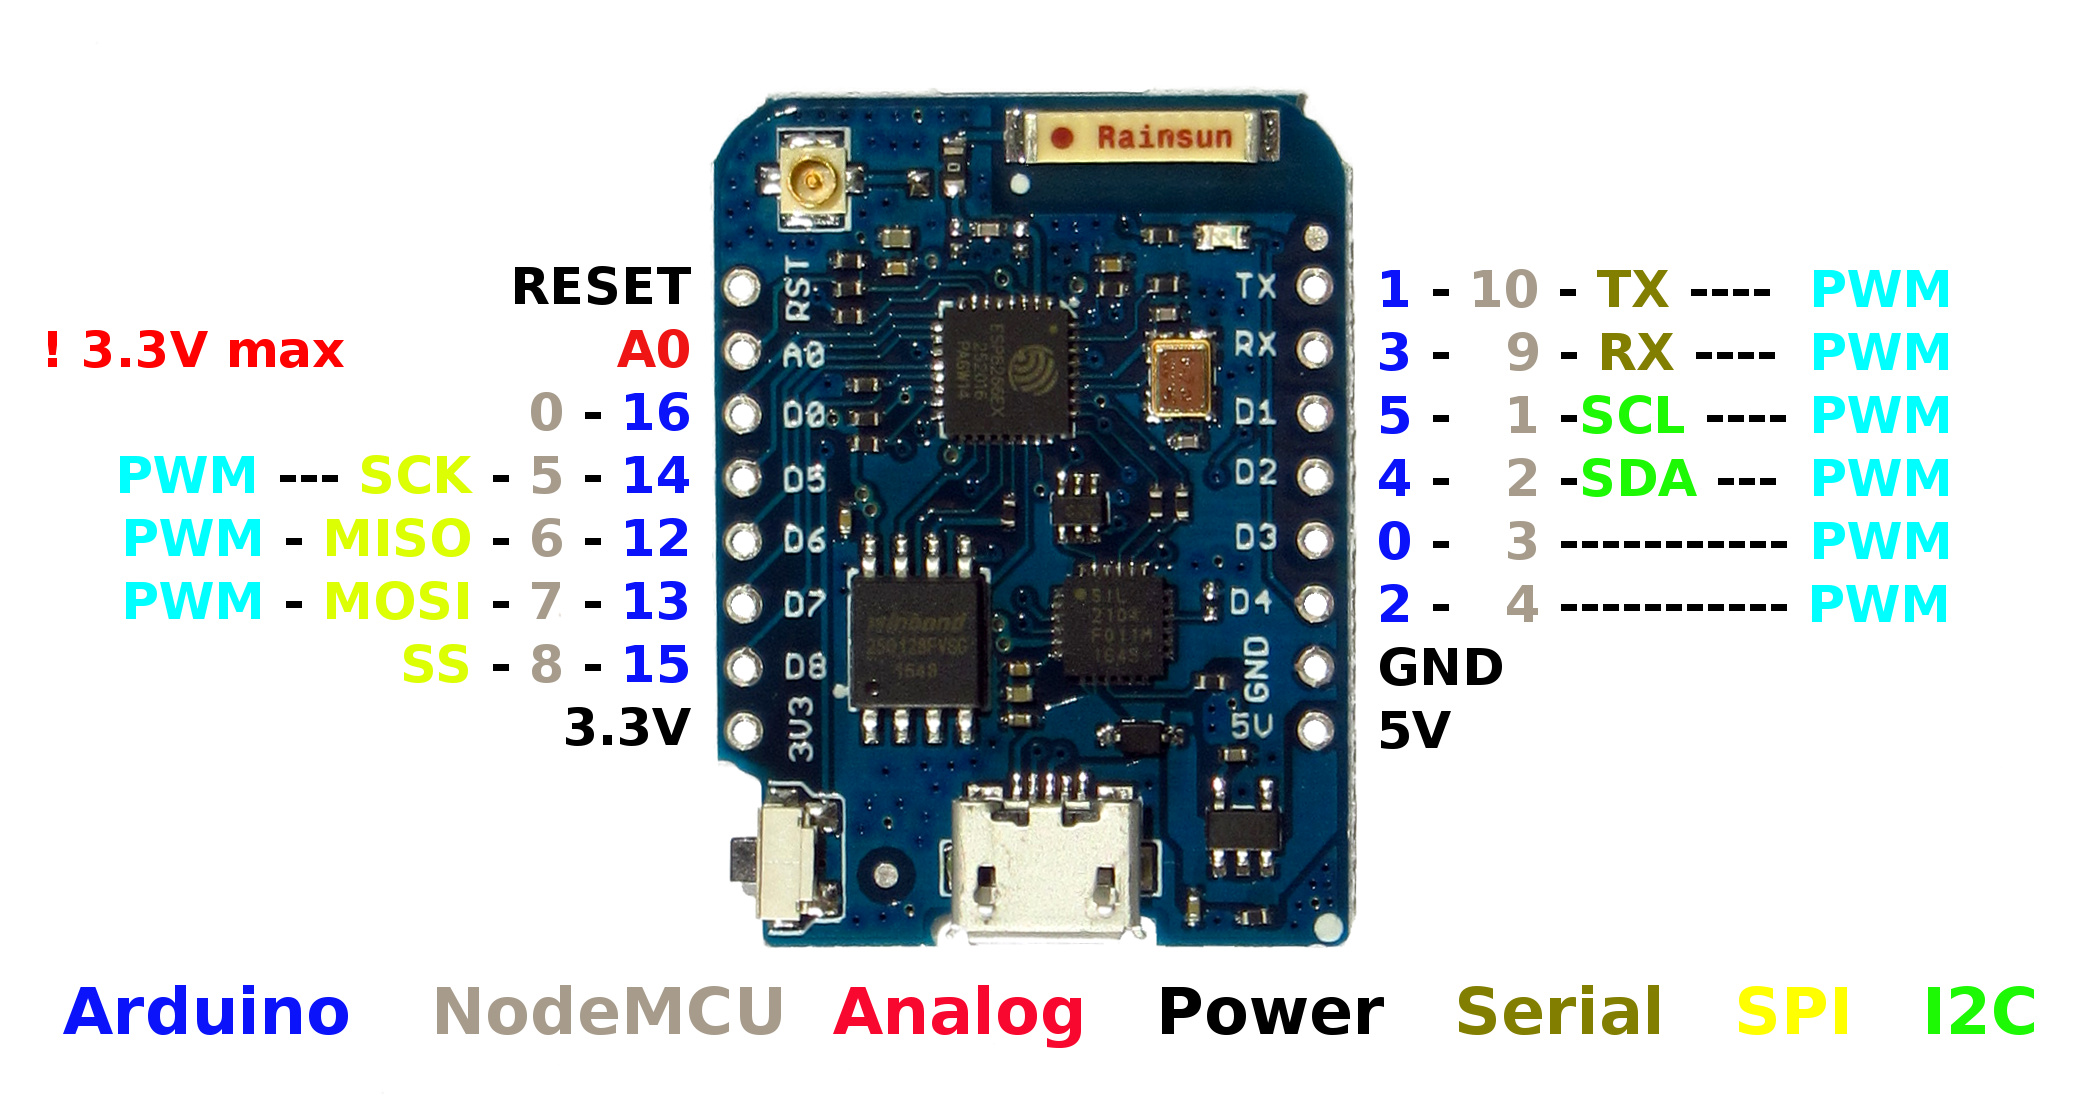 inference Zoom in preface REST API Can not Read Digital PIN (ESP8266) - Solved - Blynk Community